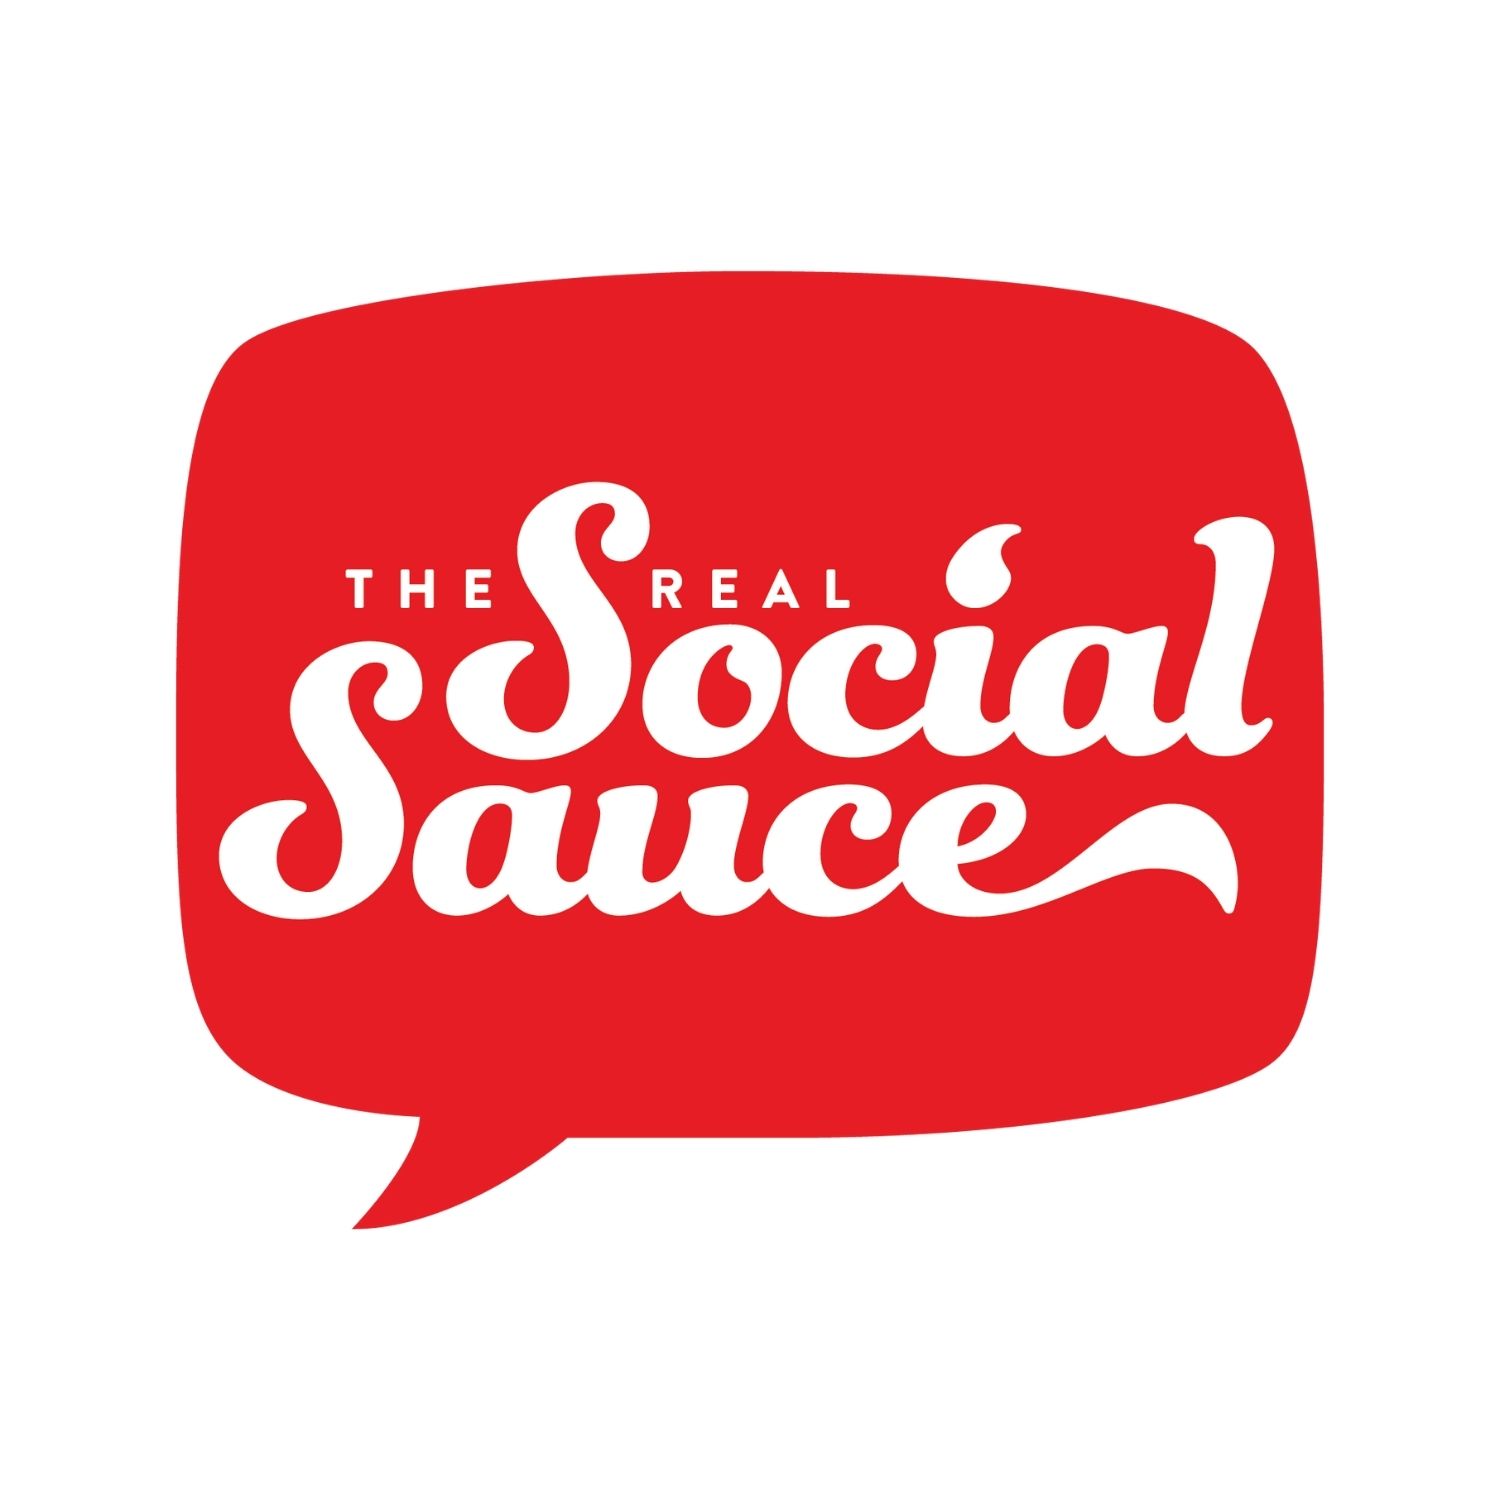 The Real Social Sauce